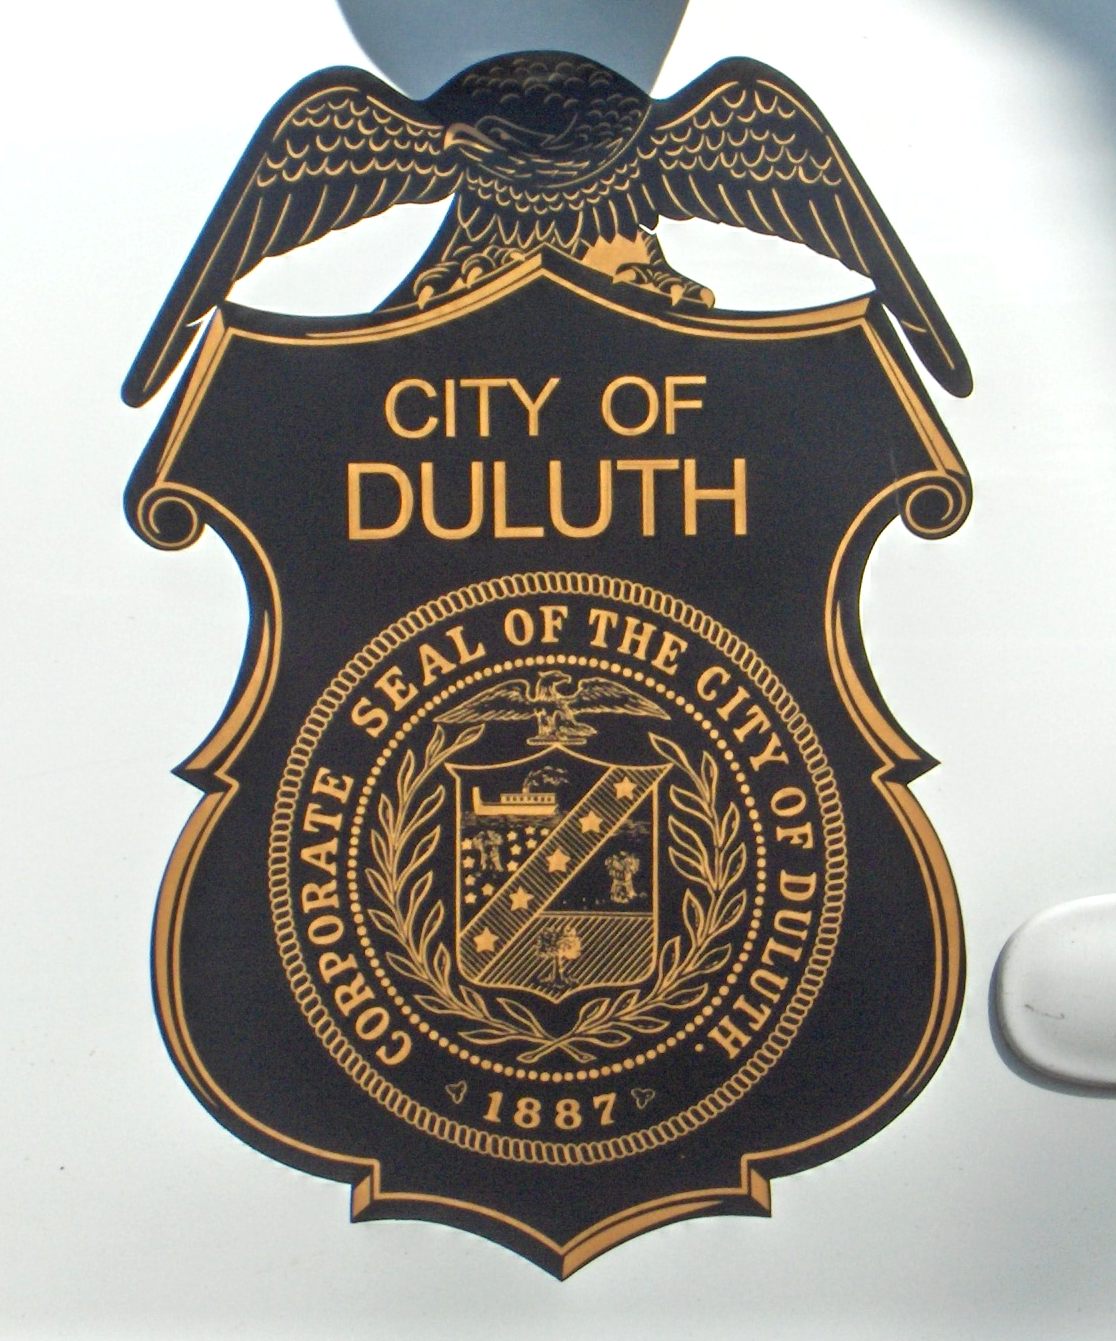 Duluth police celebrate 150 years of service with commemorative badges -  Duluth News Tribune